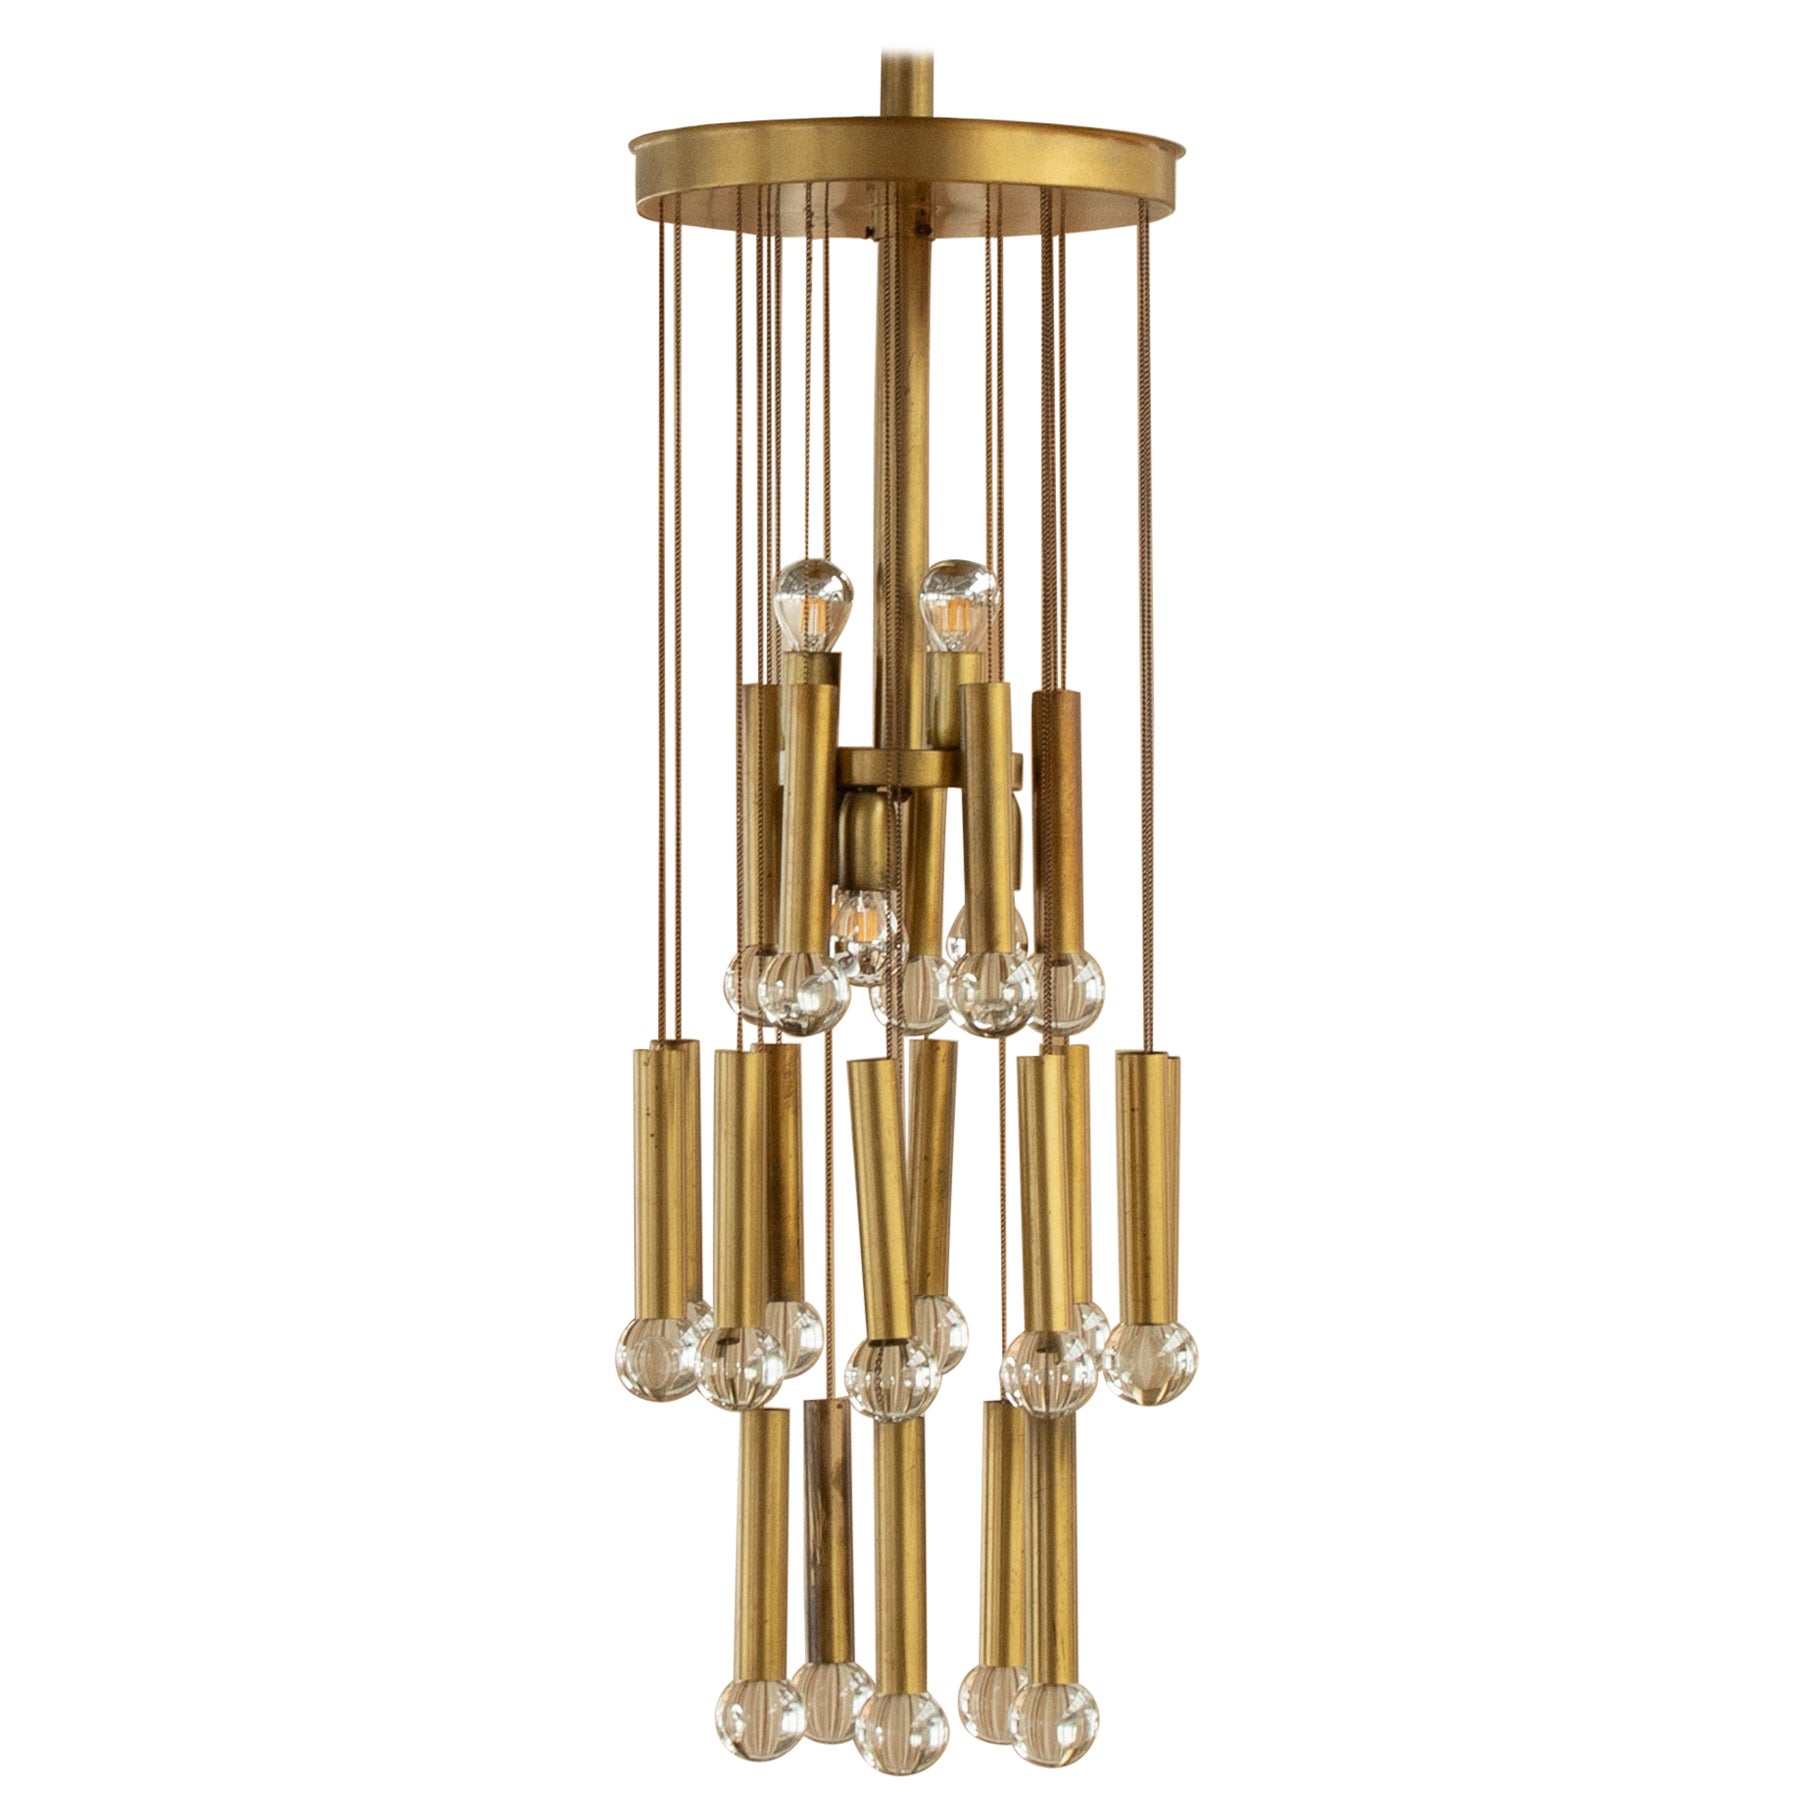 70s gold brass chain chandelier with glass globes